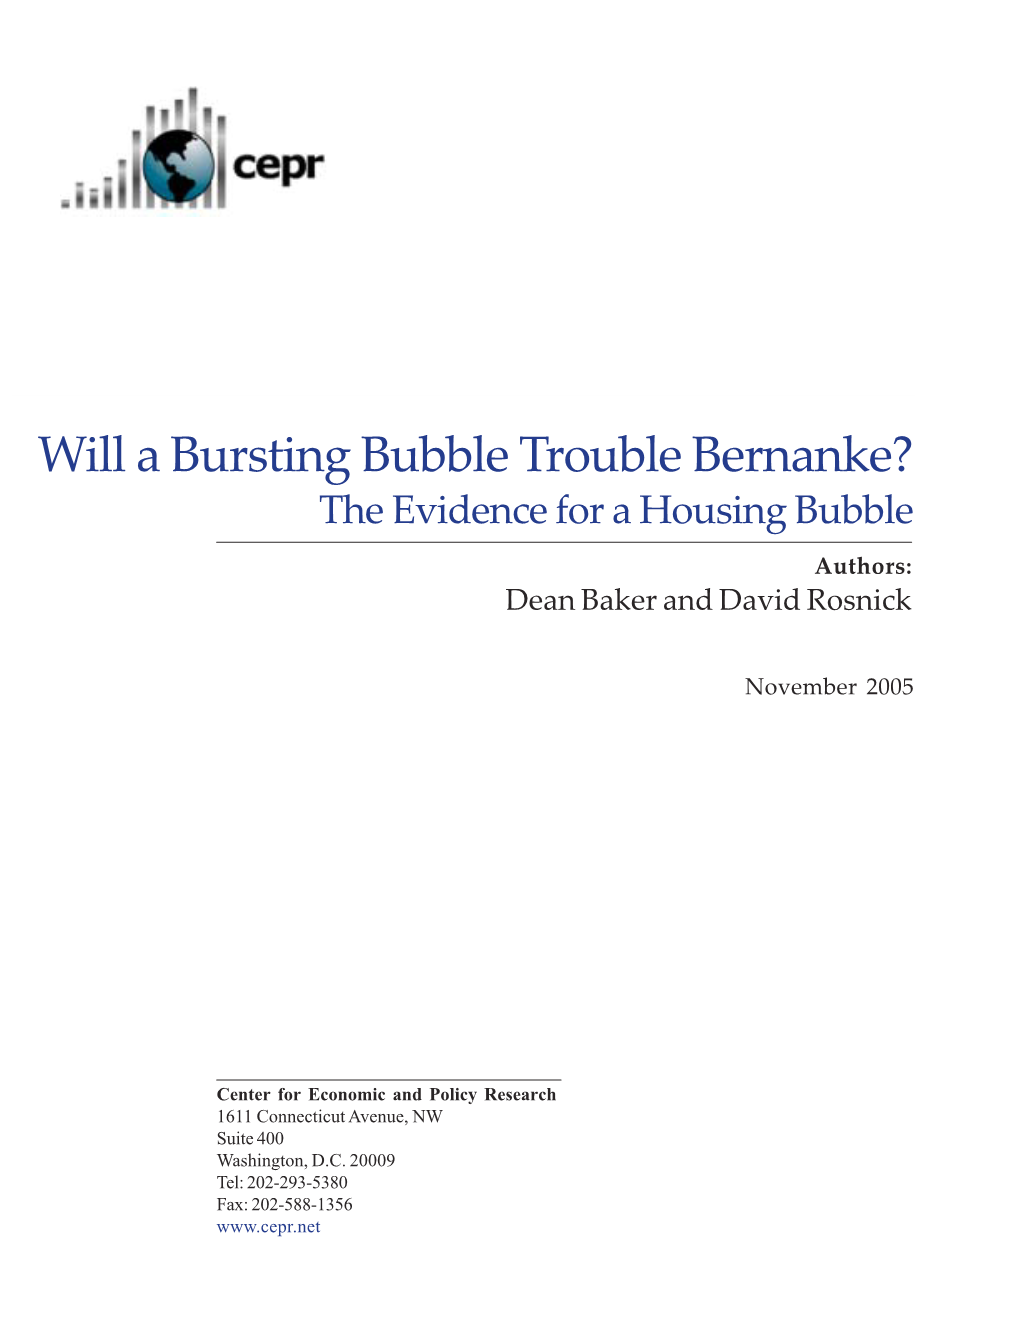 The Housing Bubble: How We Know It's Real 3 the Non-Bubble Case - What Are the Fundamentals? 5 the Evidence for a Housing Bubble 7 Conclusion 12